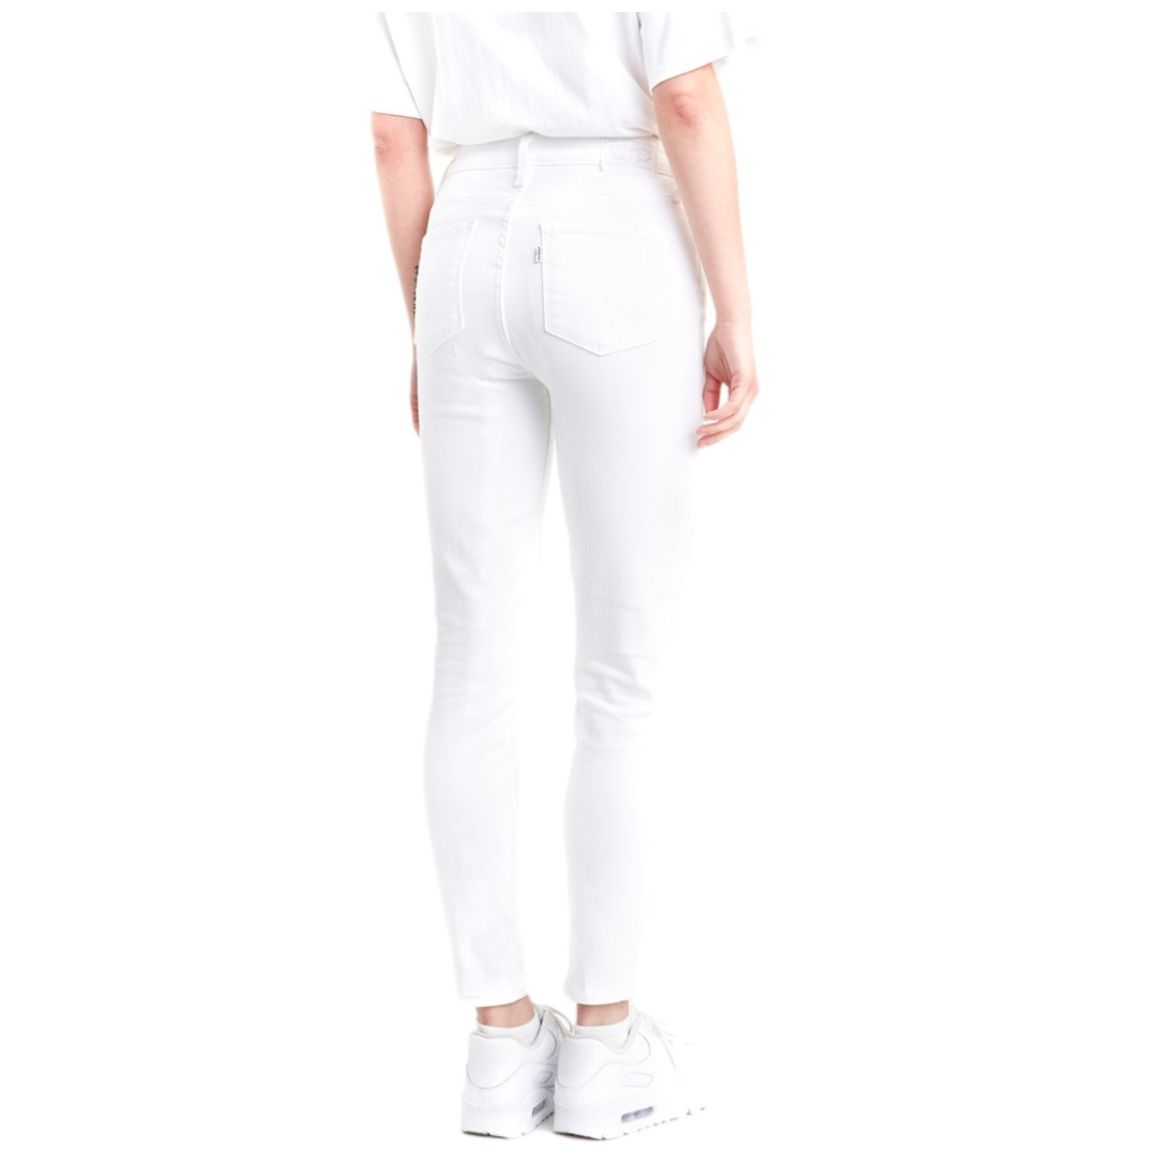 Jeans 721 High Rise Skinny Levis para Mujer